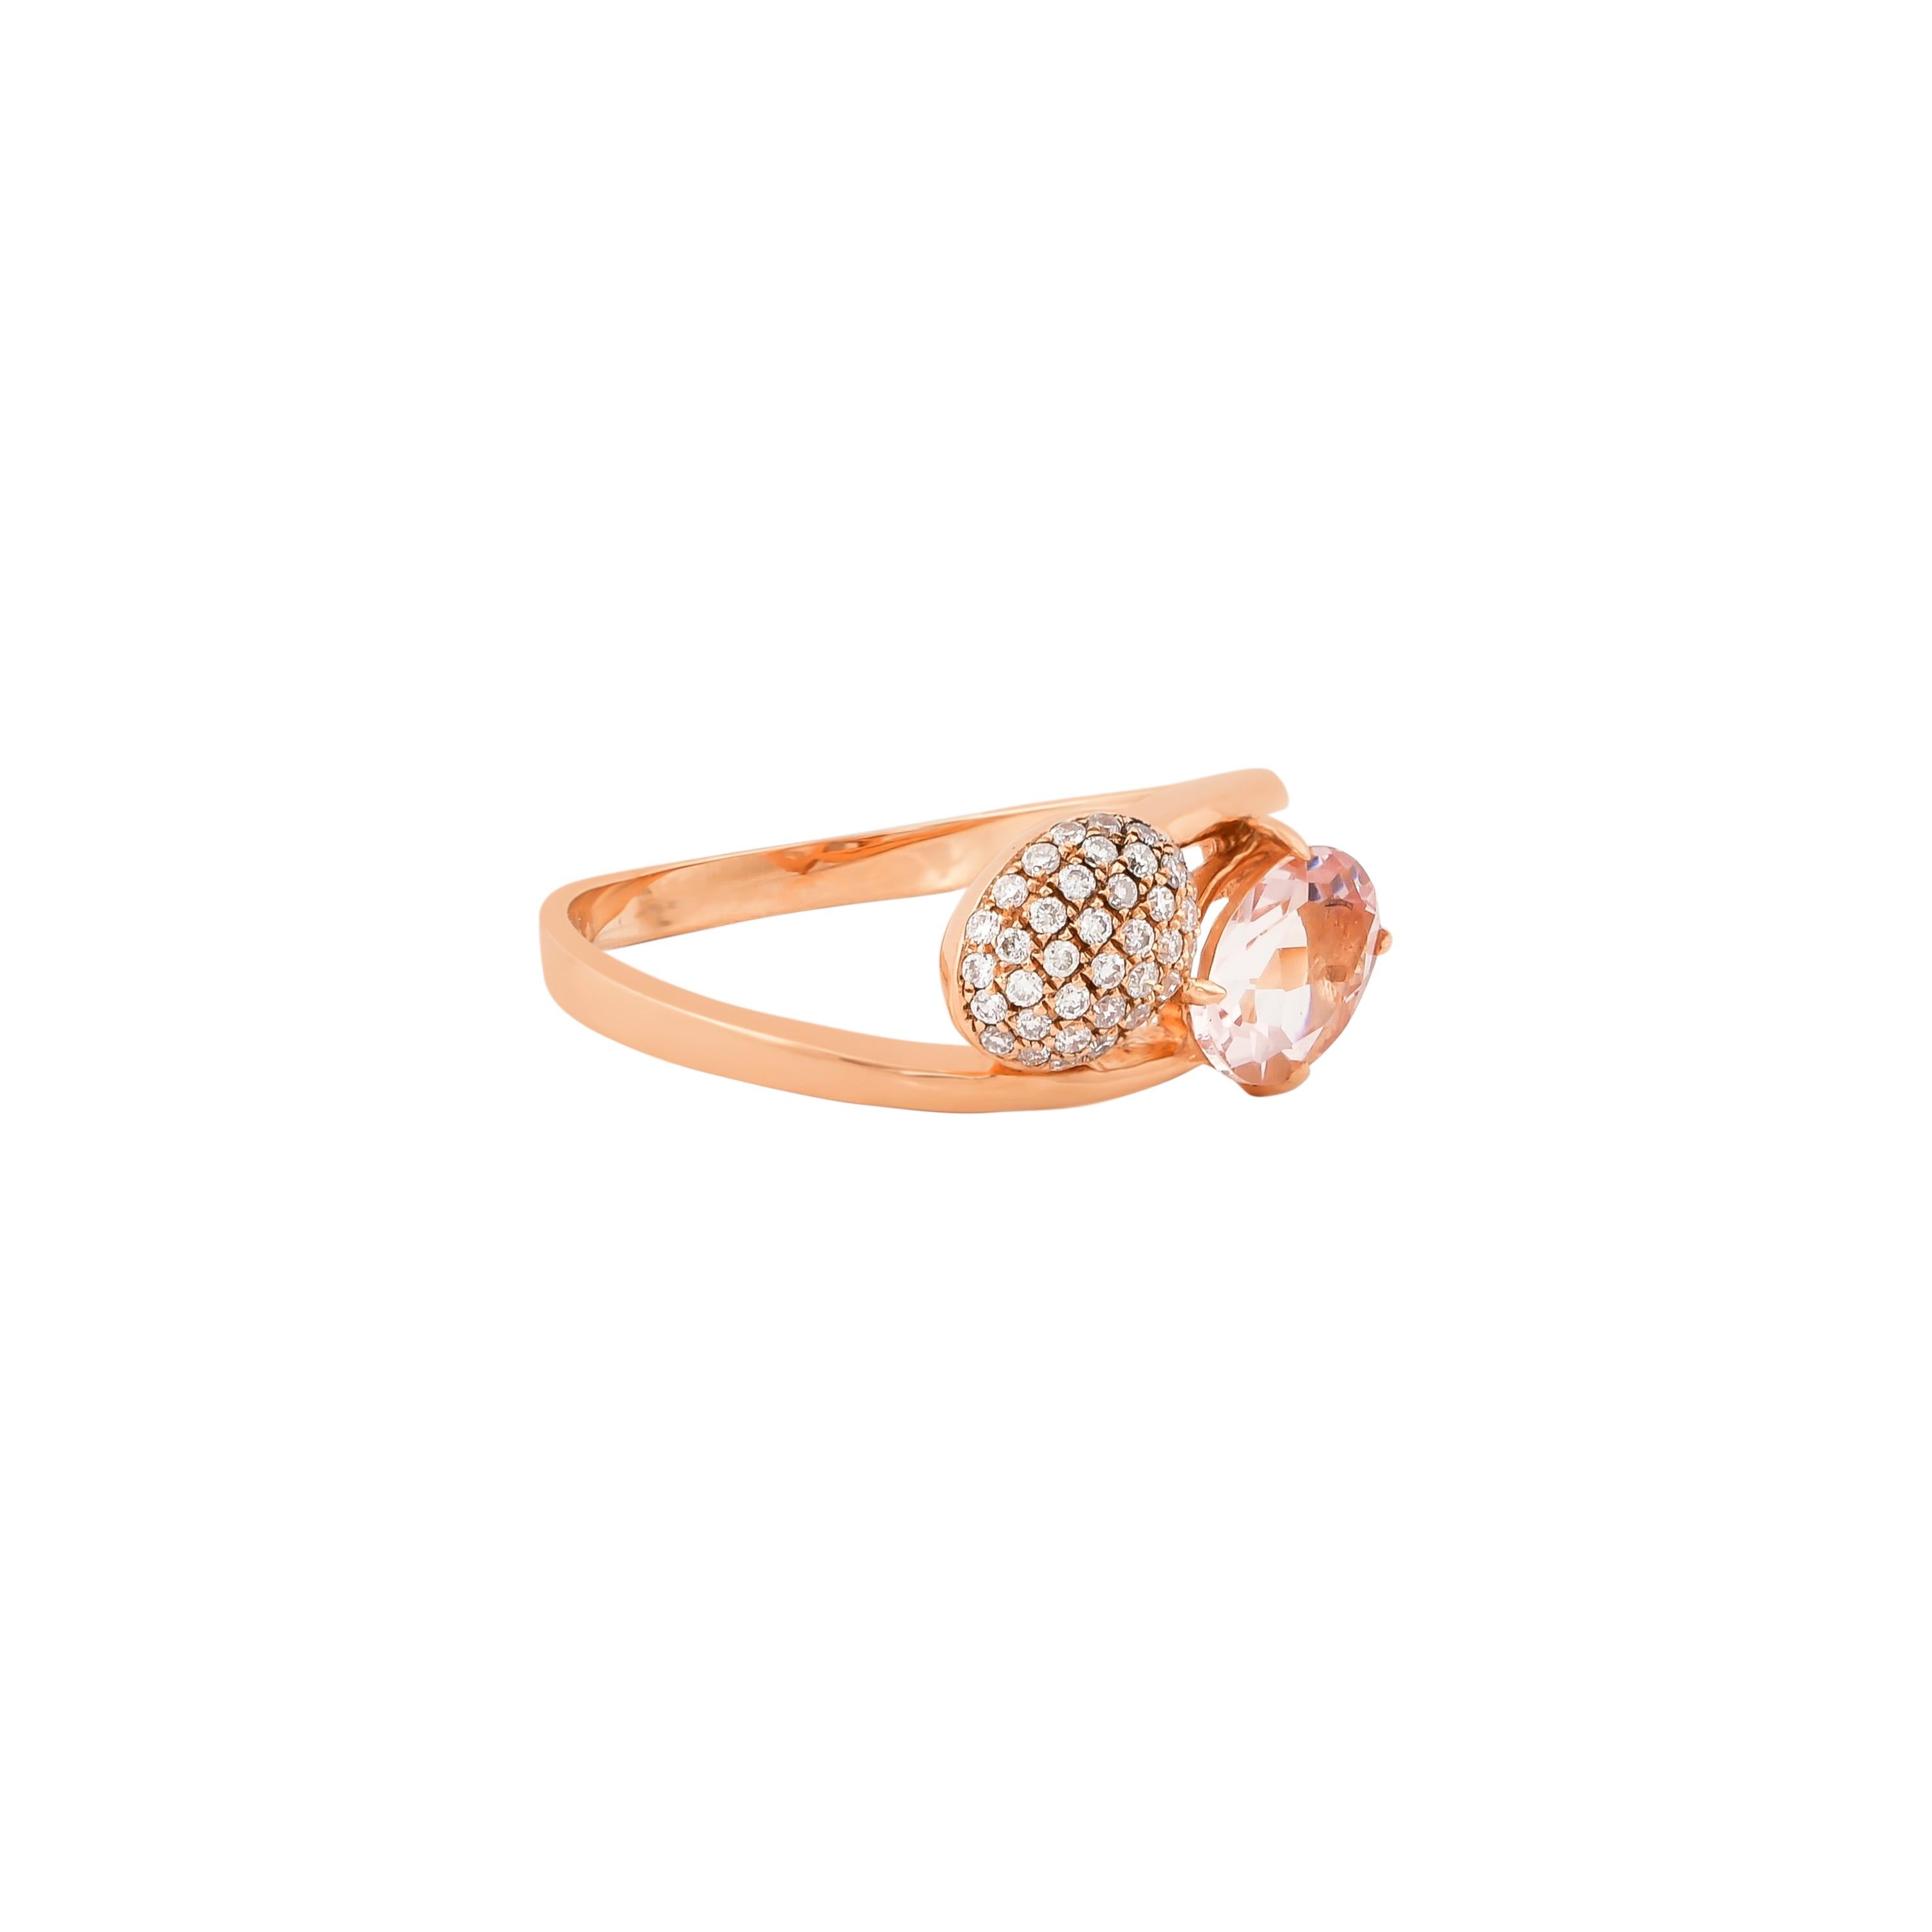 This collection features an array of magnificent morganites! Accented with diamonds these rings are made in rose gold and present a classic yet elegant look. 

Classic morganite ring in 18K rose gold with diamonds. 

Morganite: 0.8 carat oval